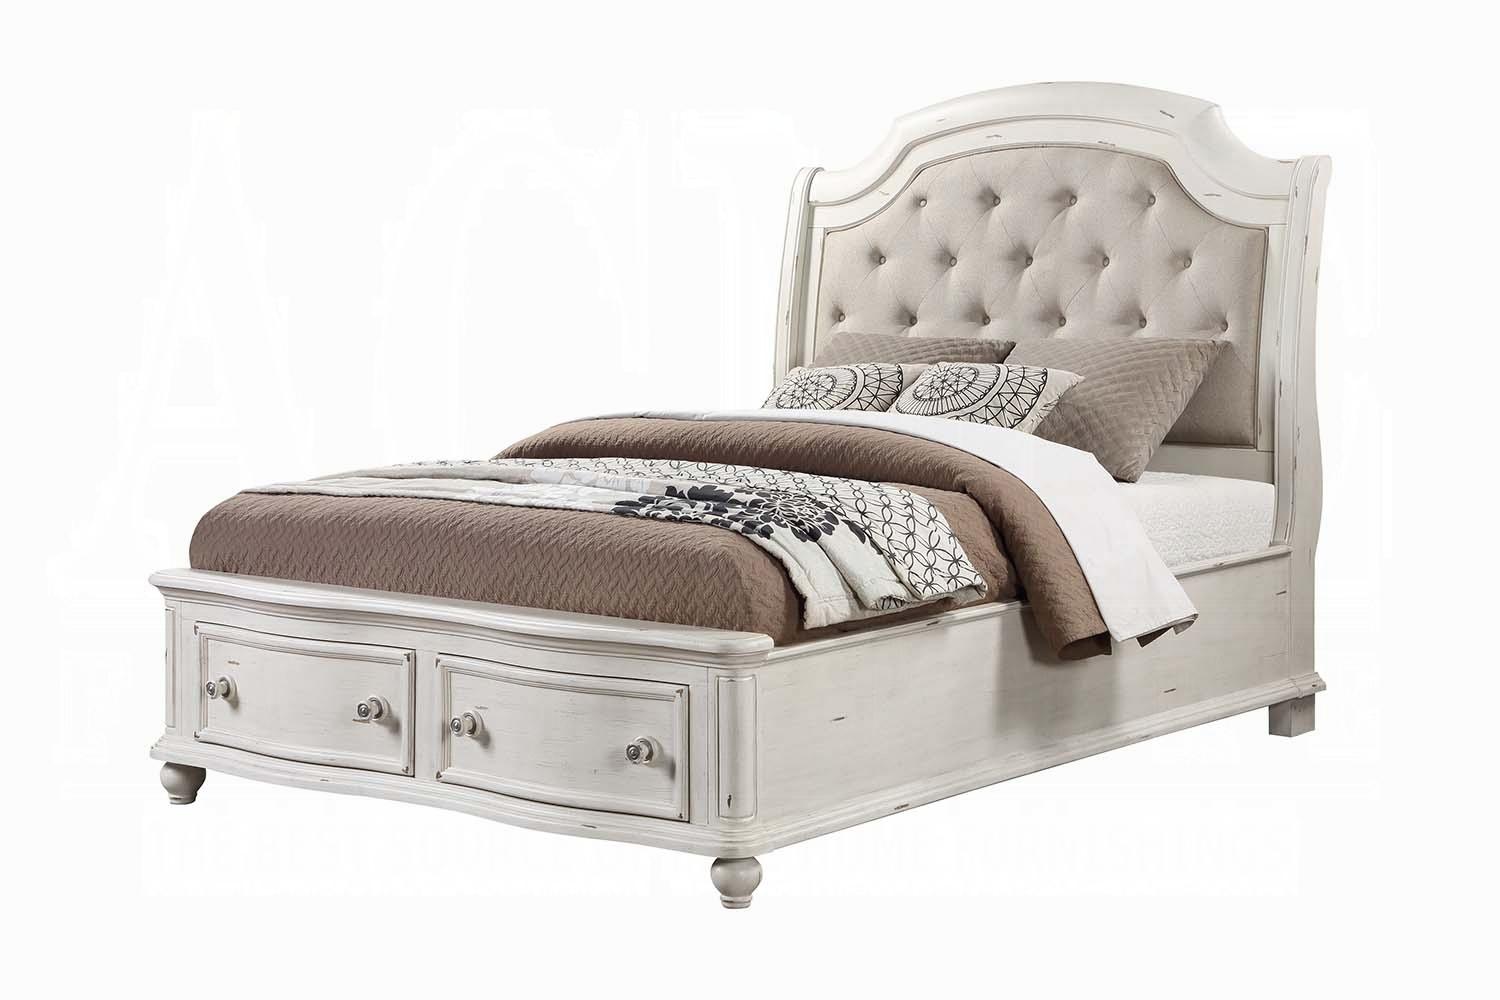 Traditional Storage Bed Jaqueline Queen Storage Bed BD01433Q BD01433Q in Antique White, Gray Linen